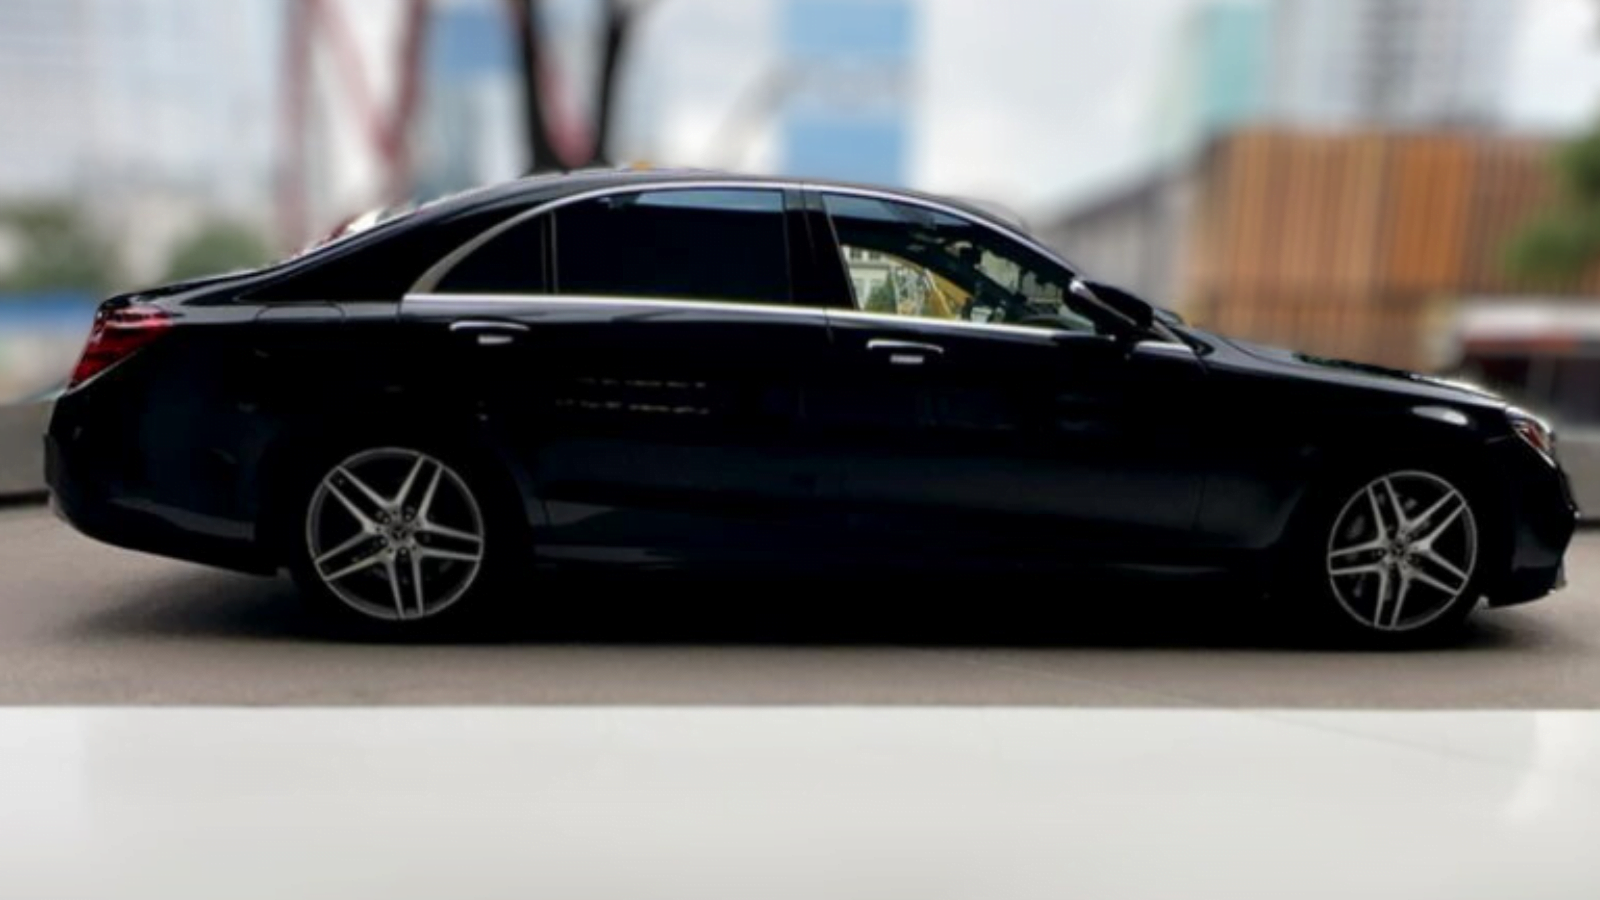 Image: Mercedes S-class NY Black Cars, Luxury Cars in New York